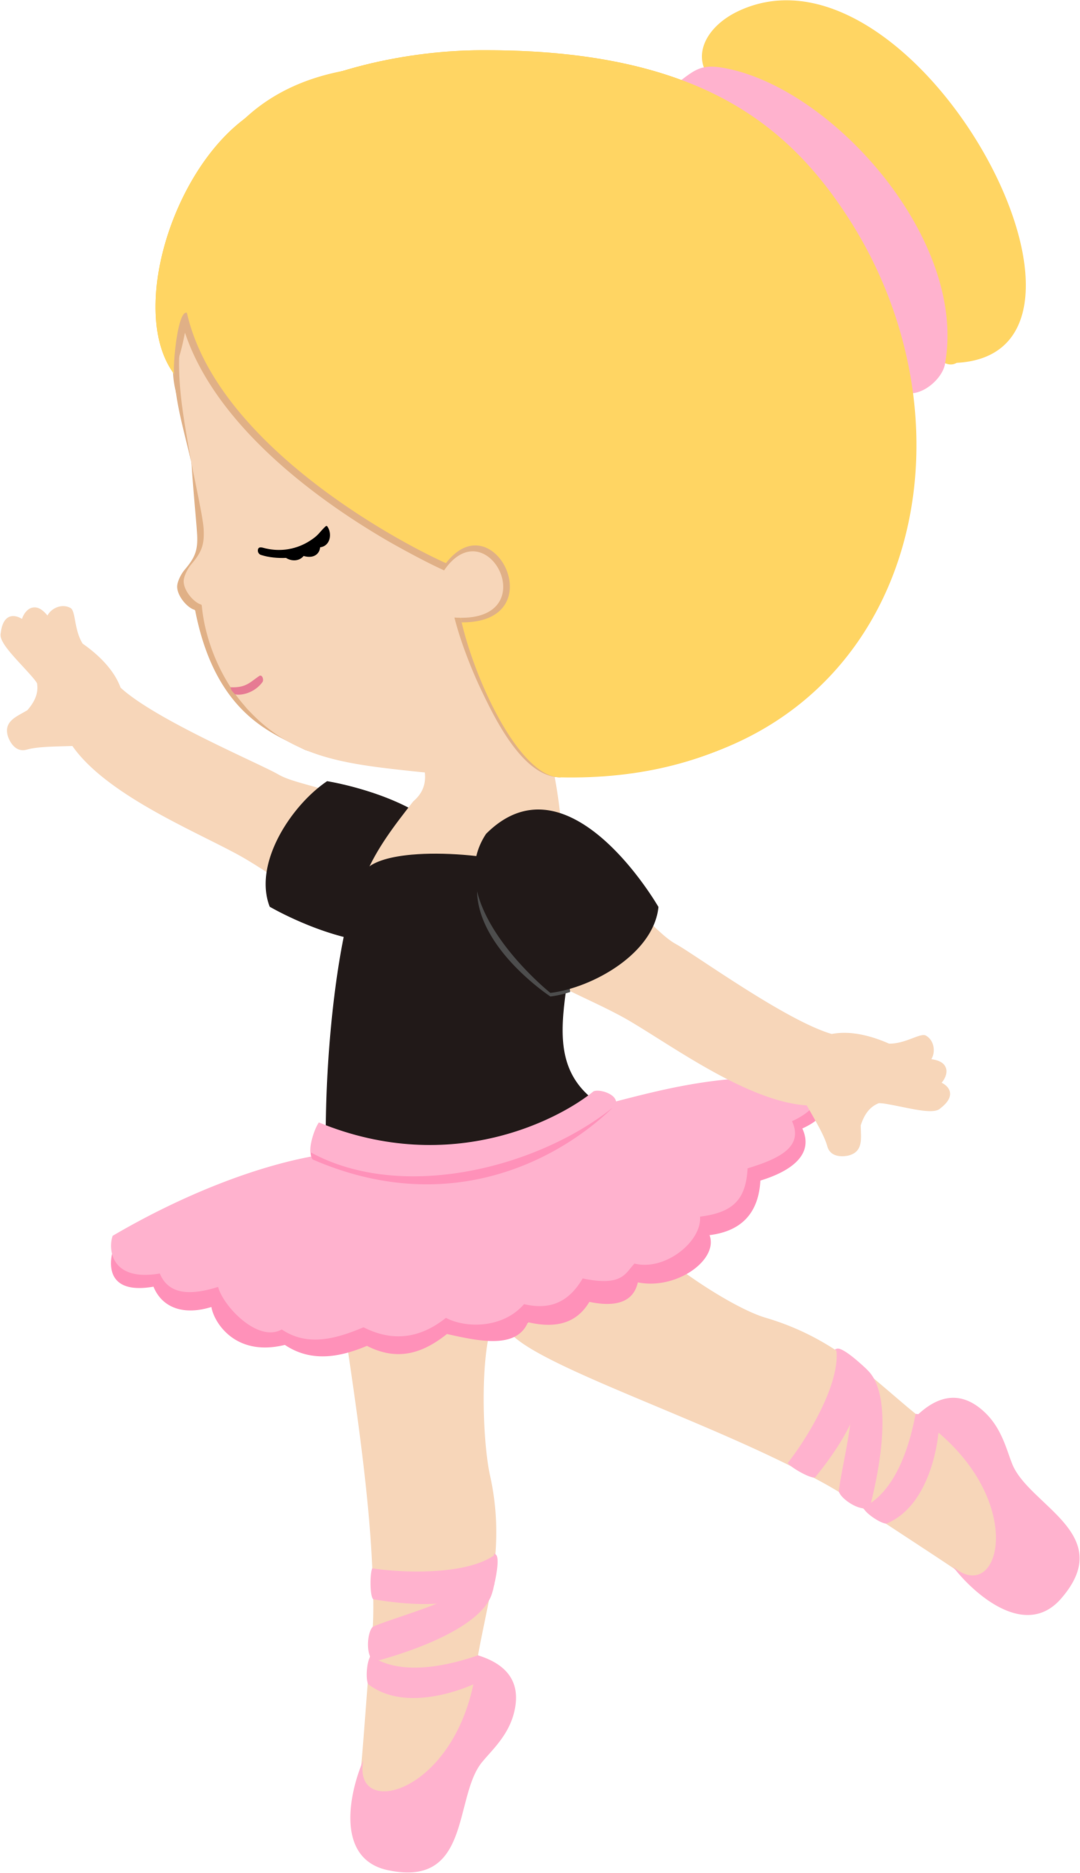  shared view all. Mummy clipart dancing